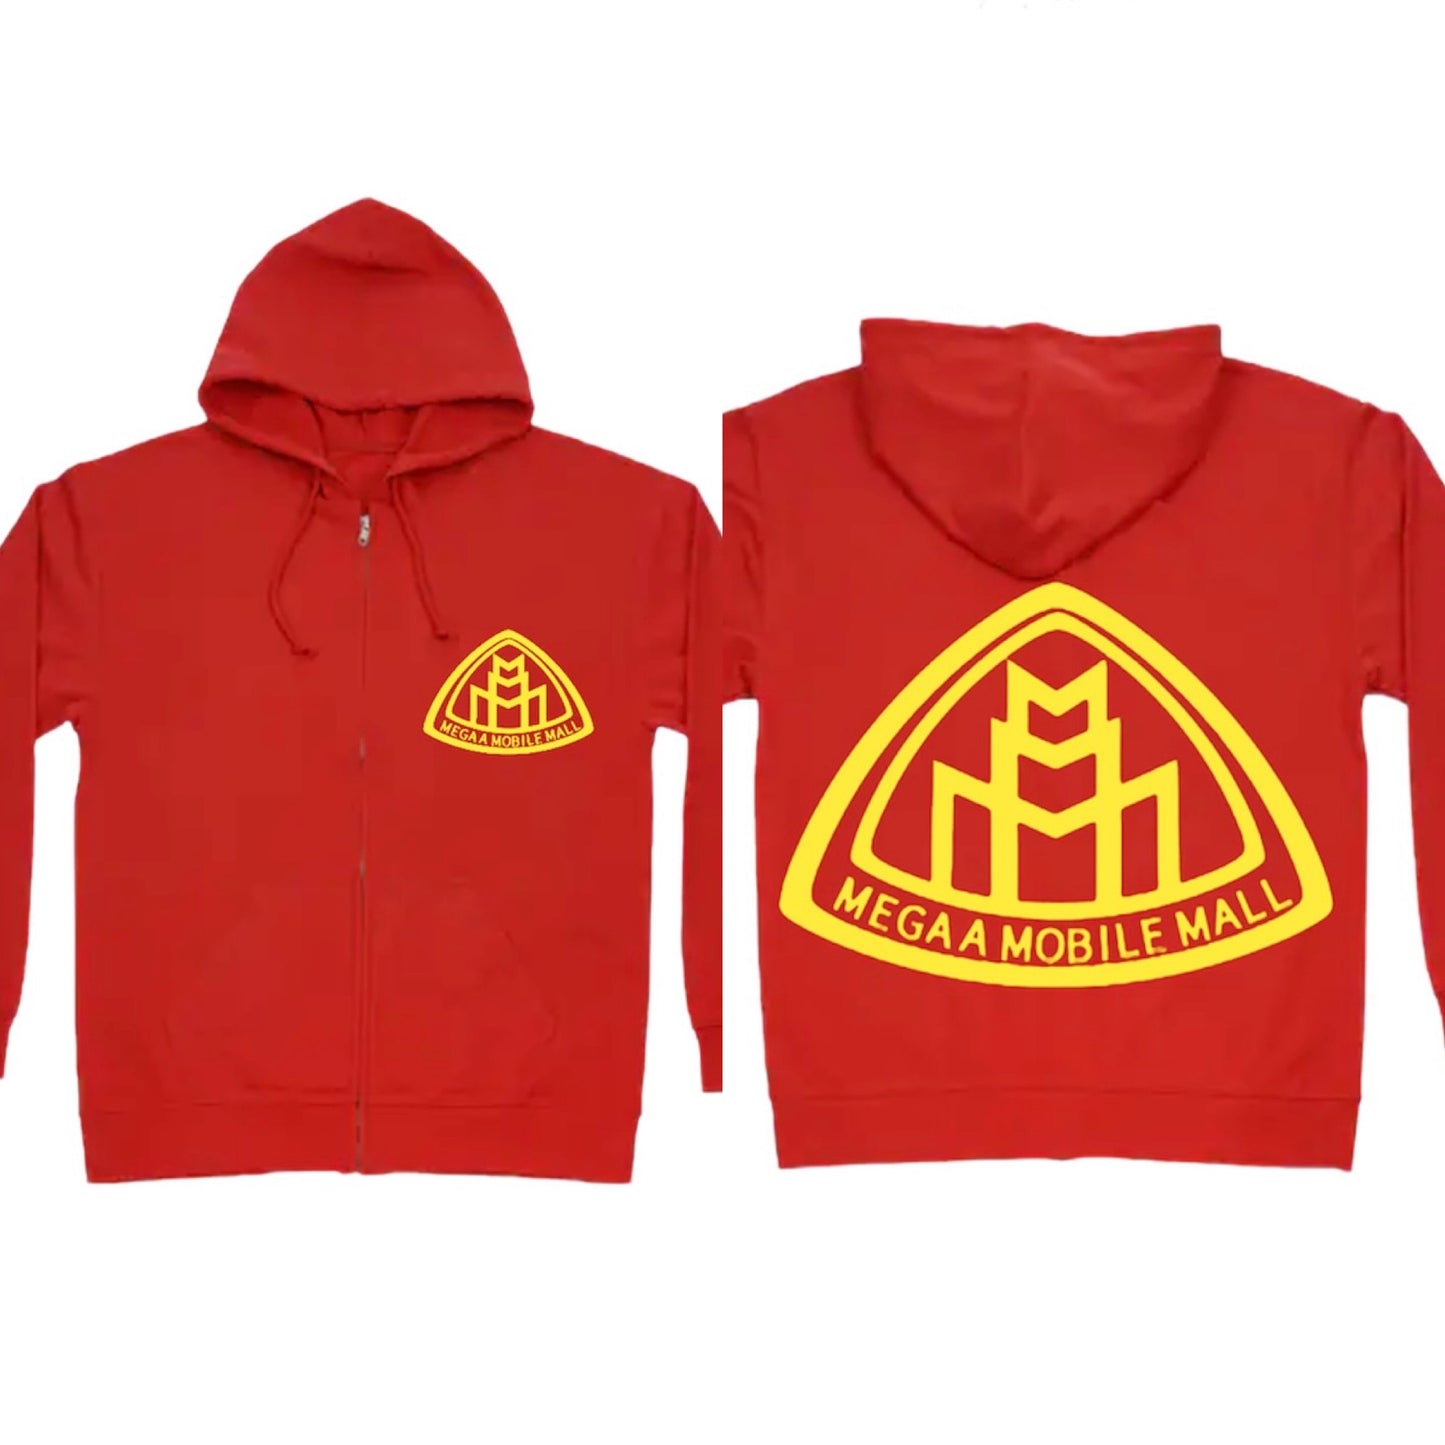 megaamobilemall red zip up hoodie with yellow logo